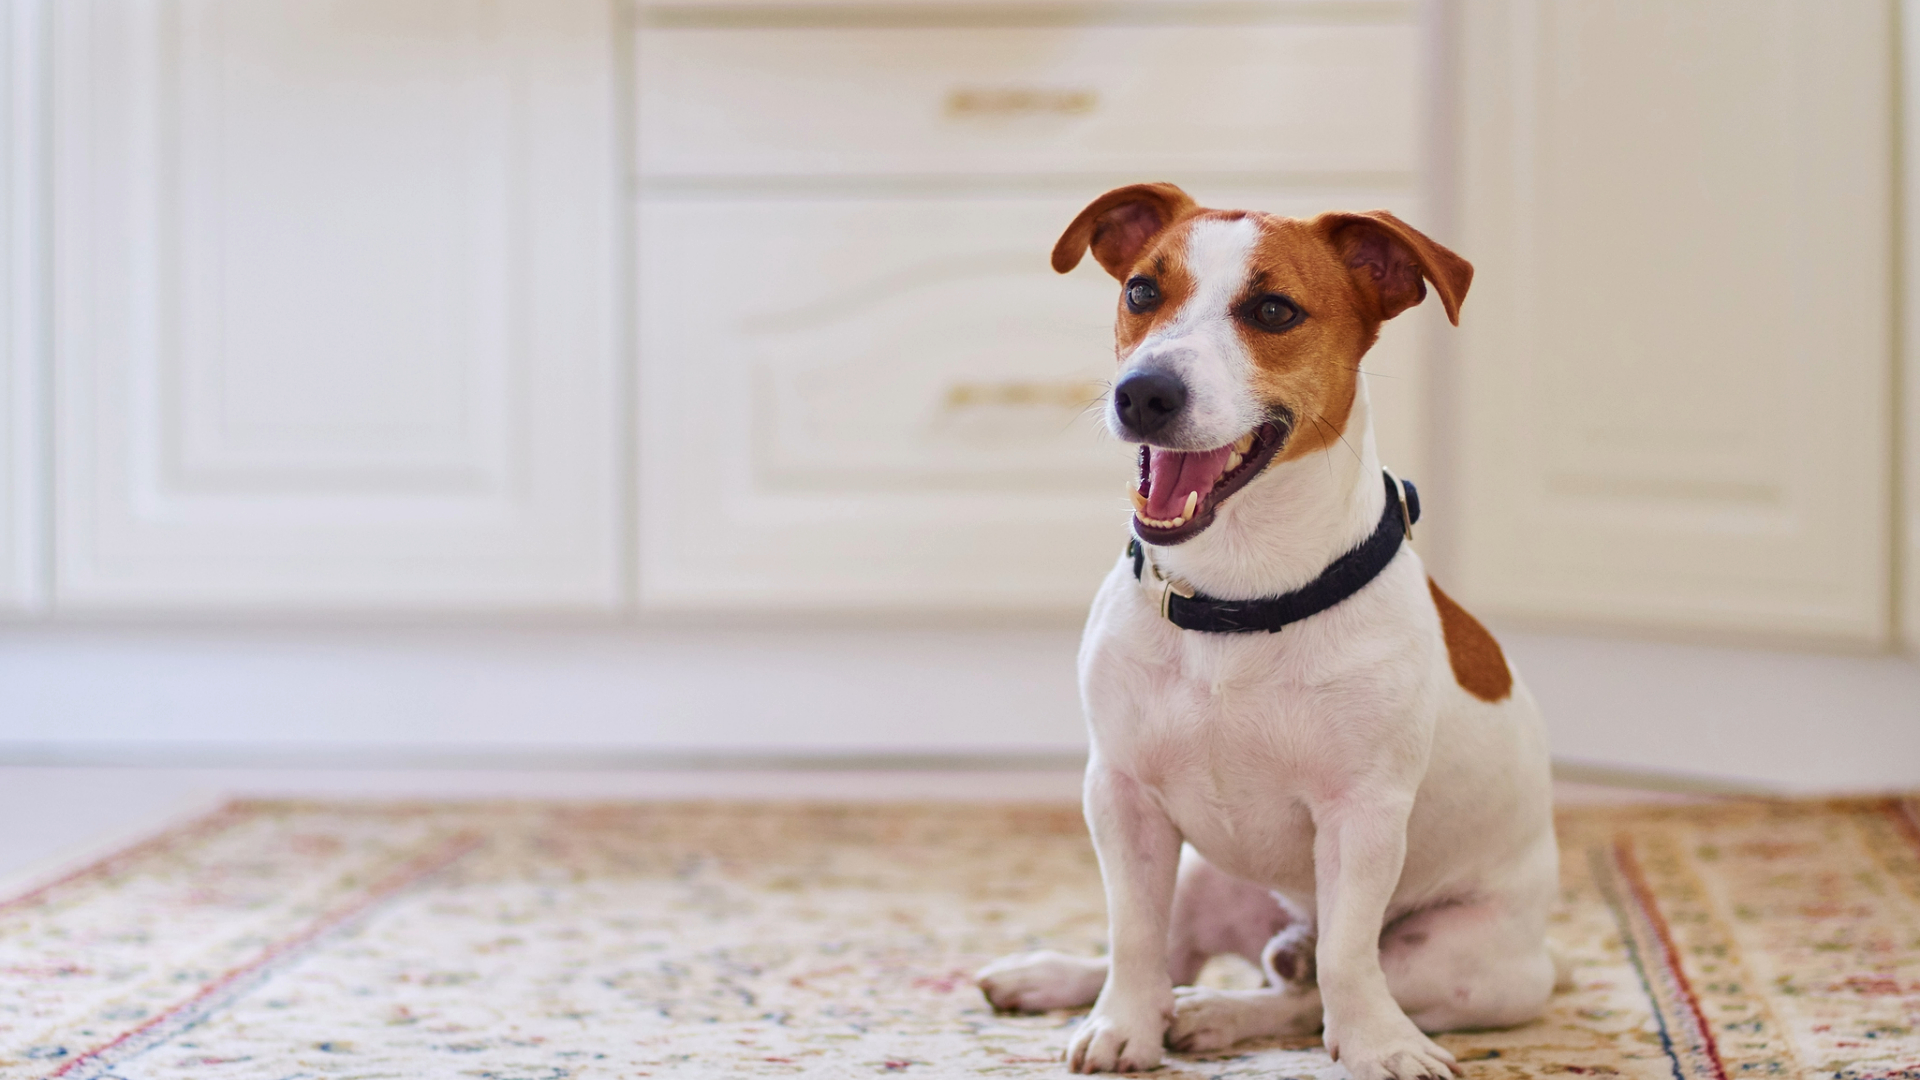 8 reasons for dog scooting (and why it's not as comical as it may seem)